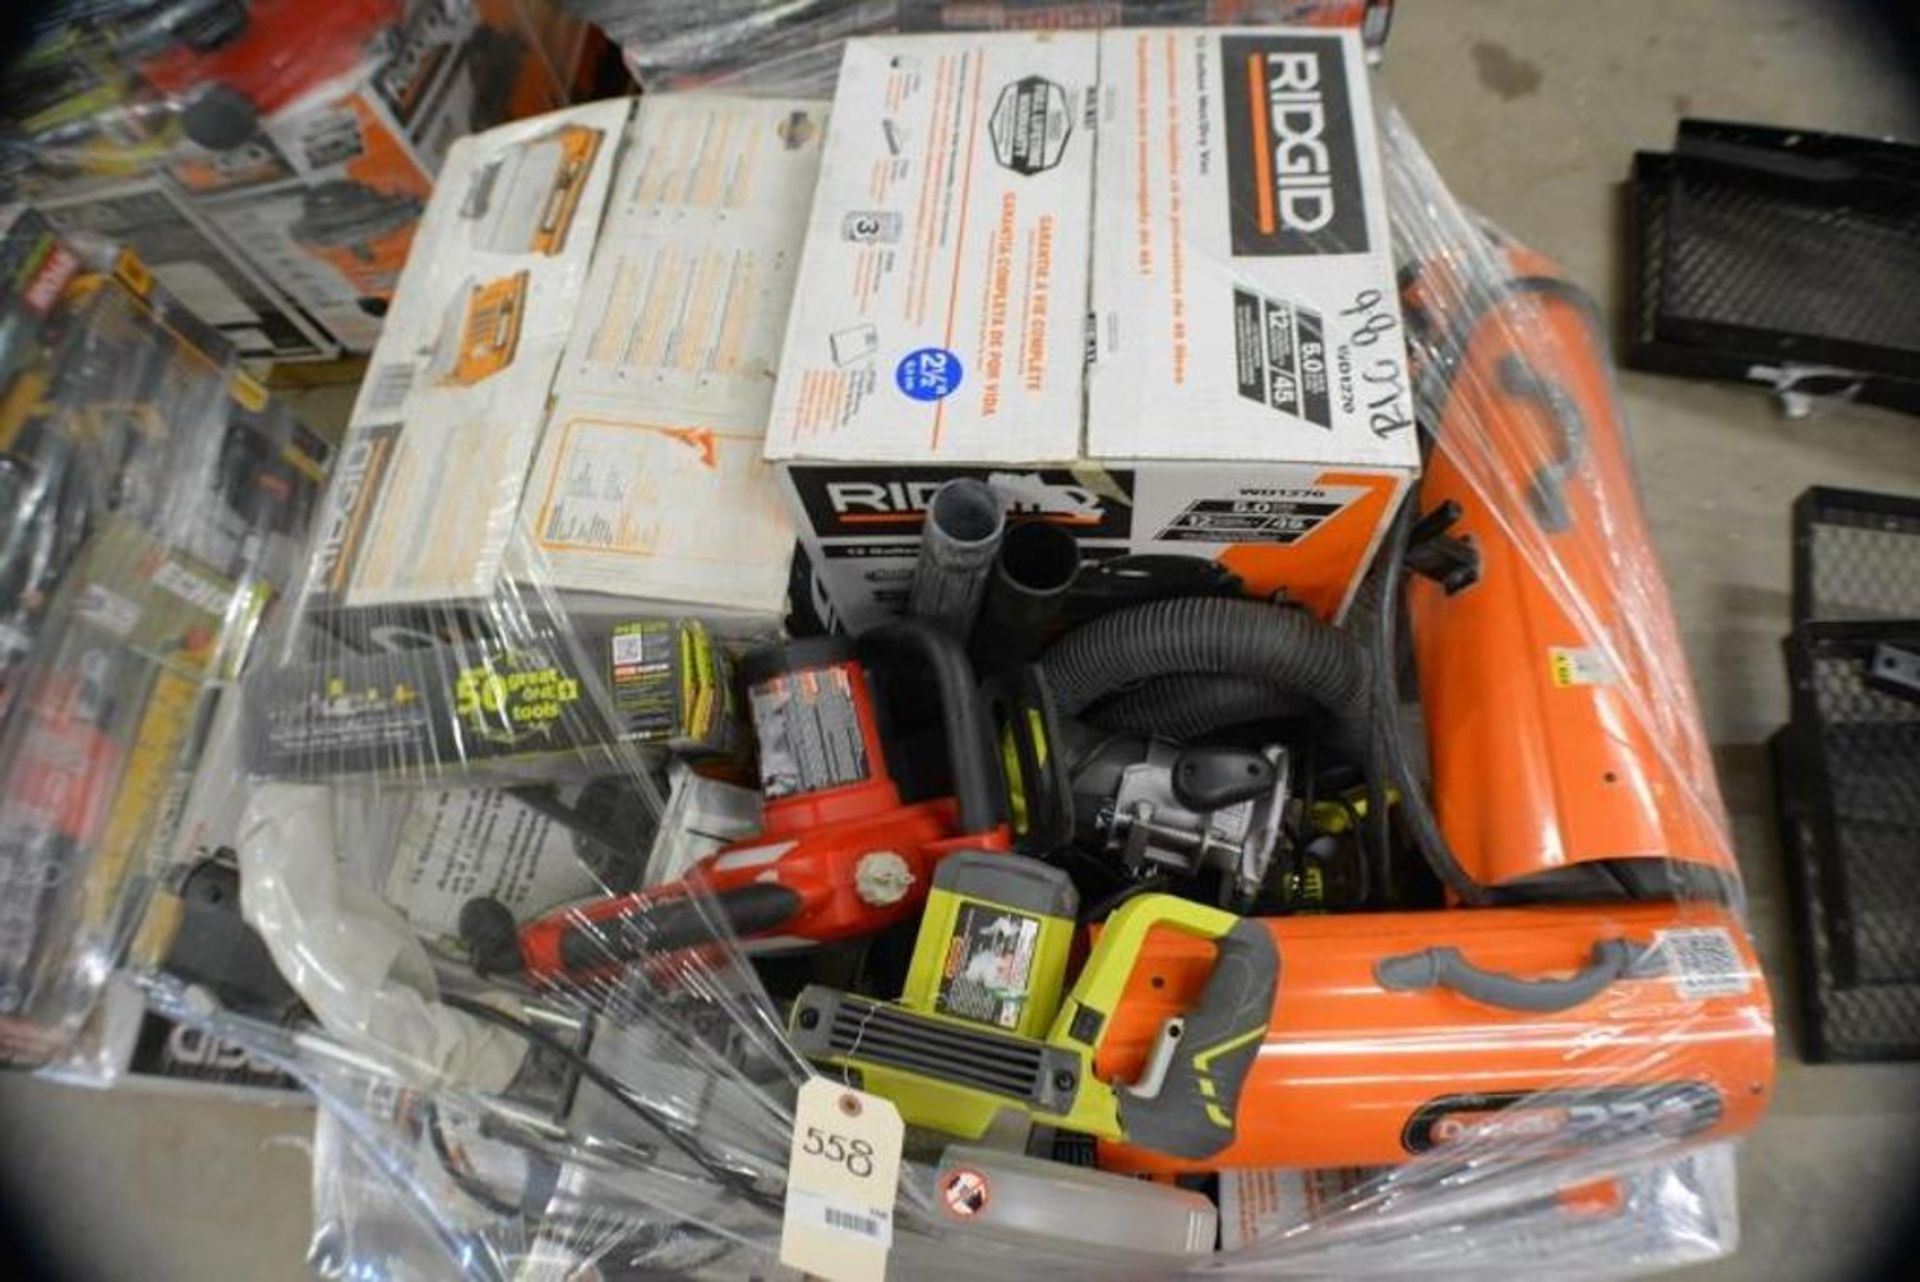 Tools. Assorted Tools and Brands. Ridgid + Ryobi + Dyna Glo-Pro. Heater + Vacuums + Saws and More. C - Image 4 of 8